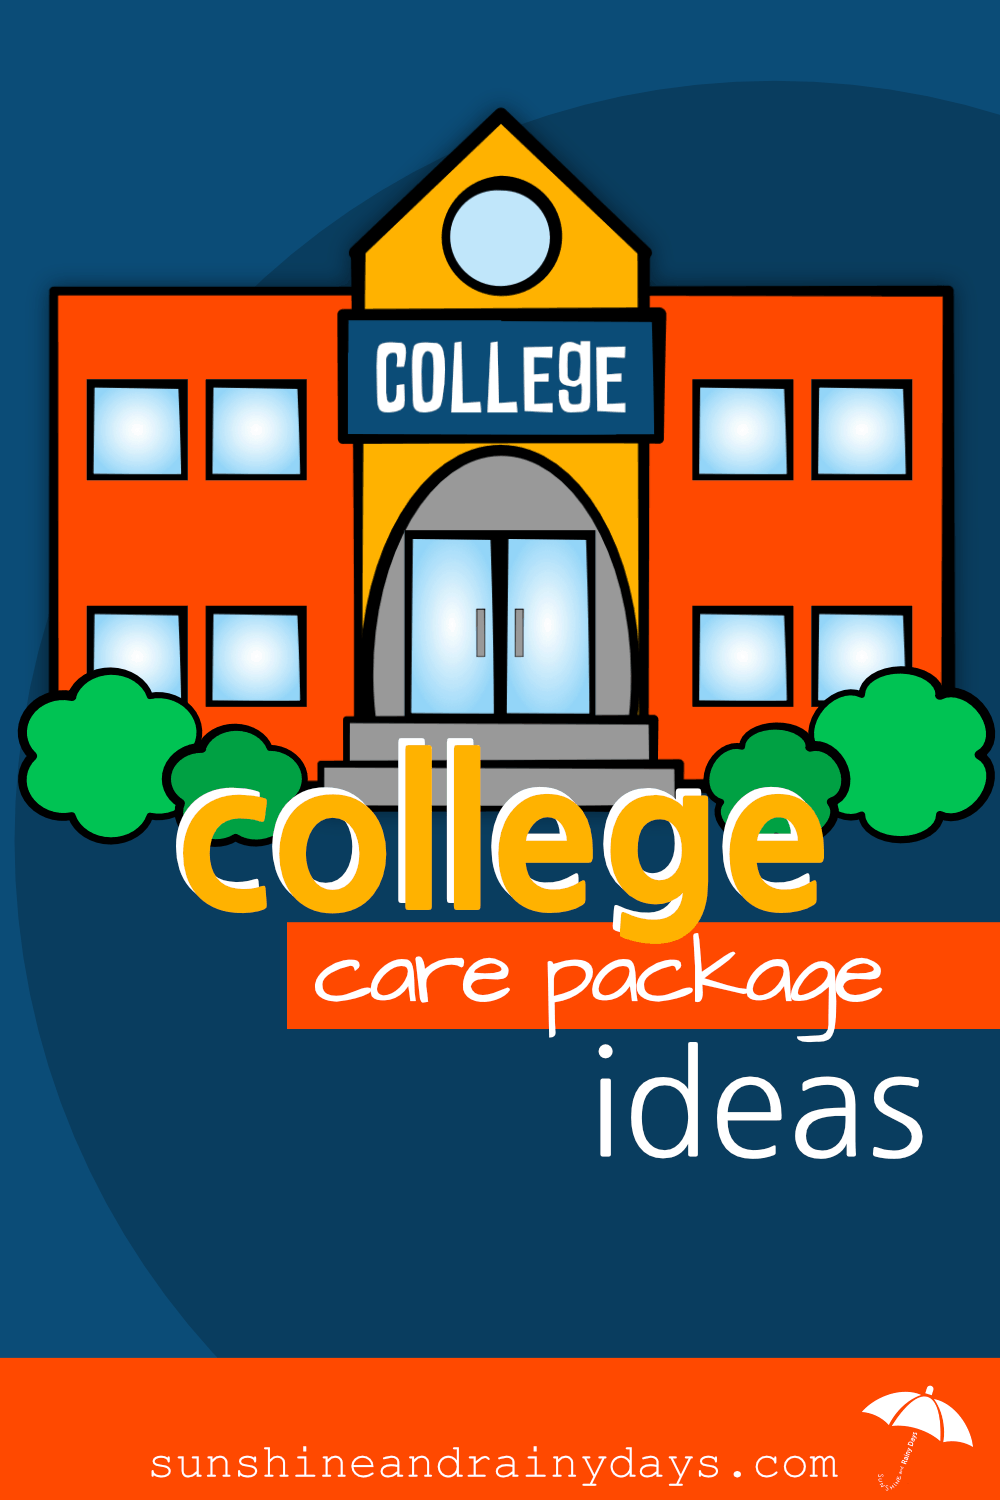 College care package ideas.